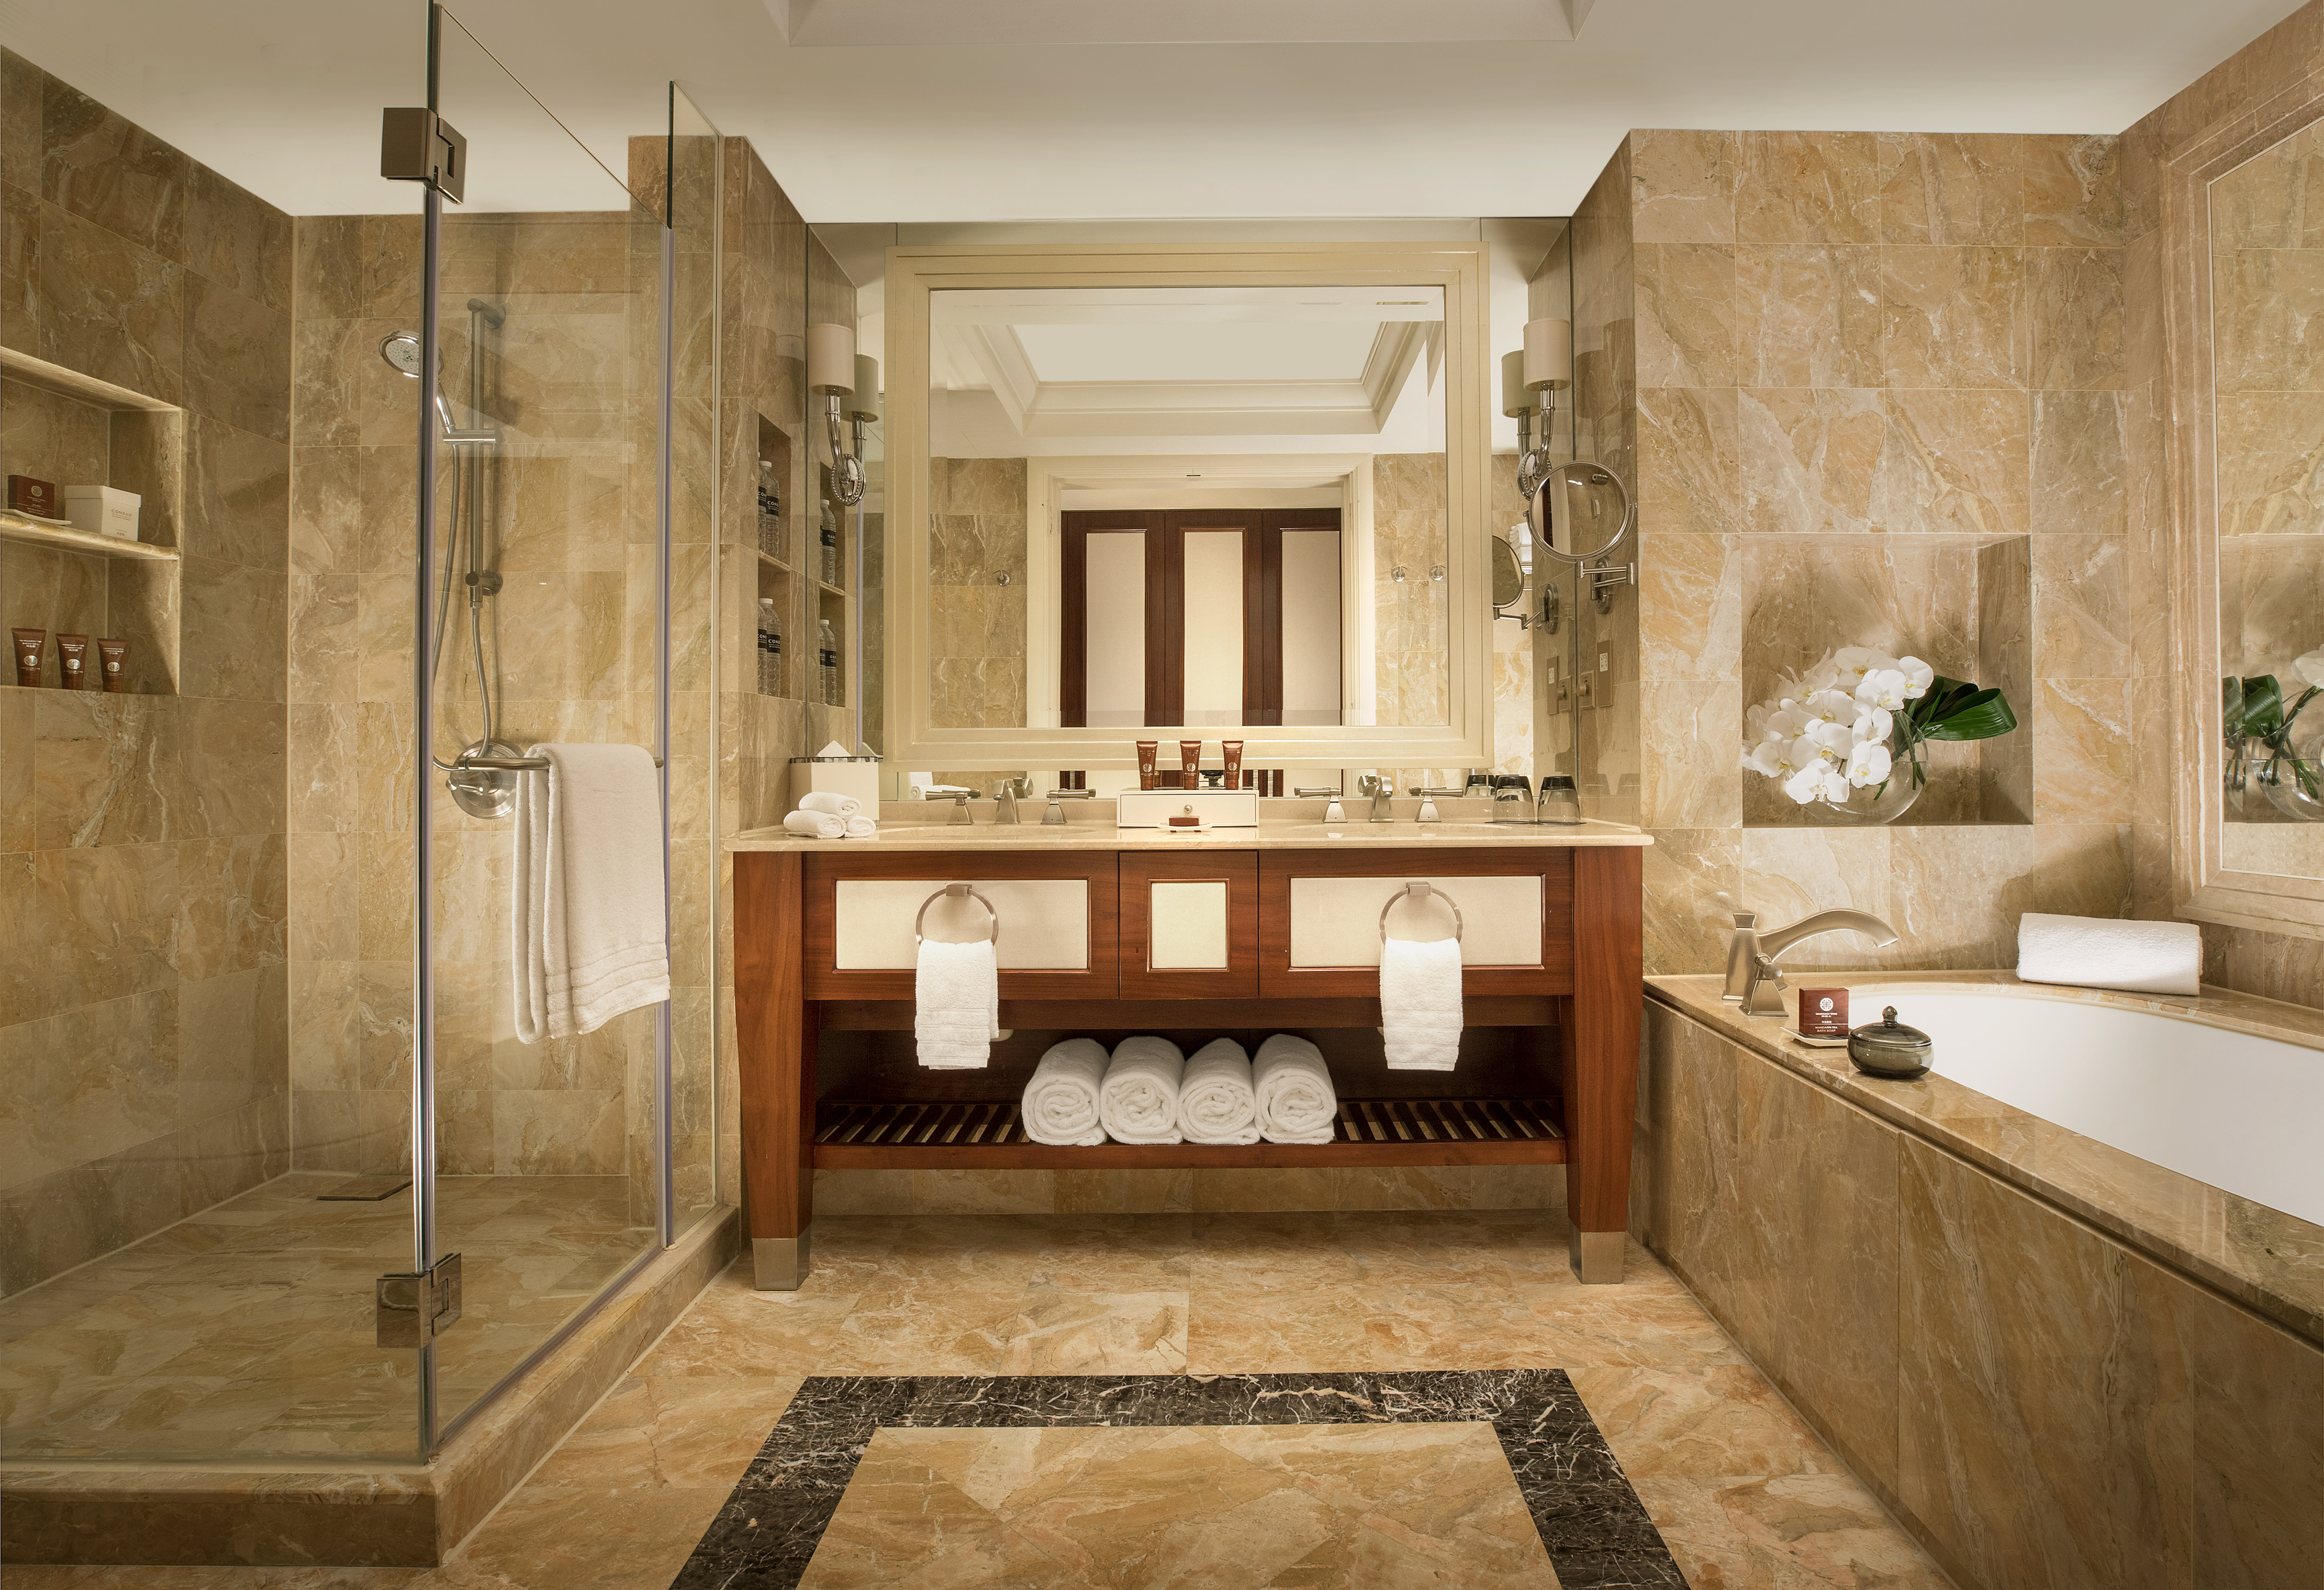 Dual Vanity Area a Bathtub and Separate Shower with Glass Doors in Guest Room